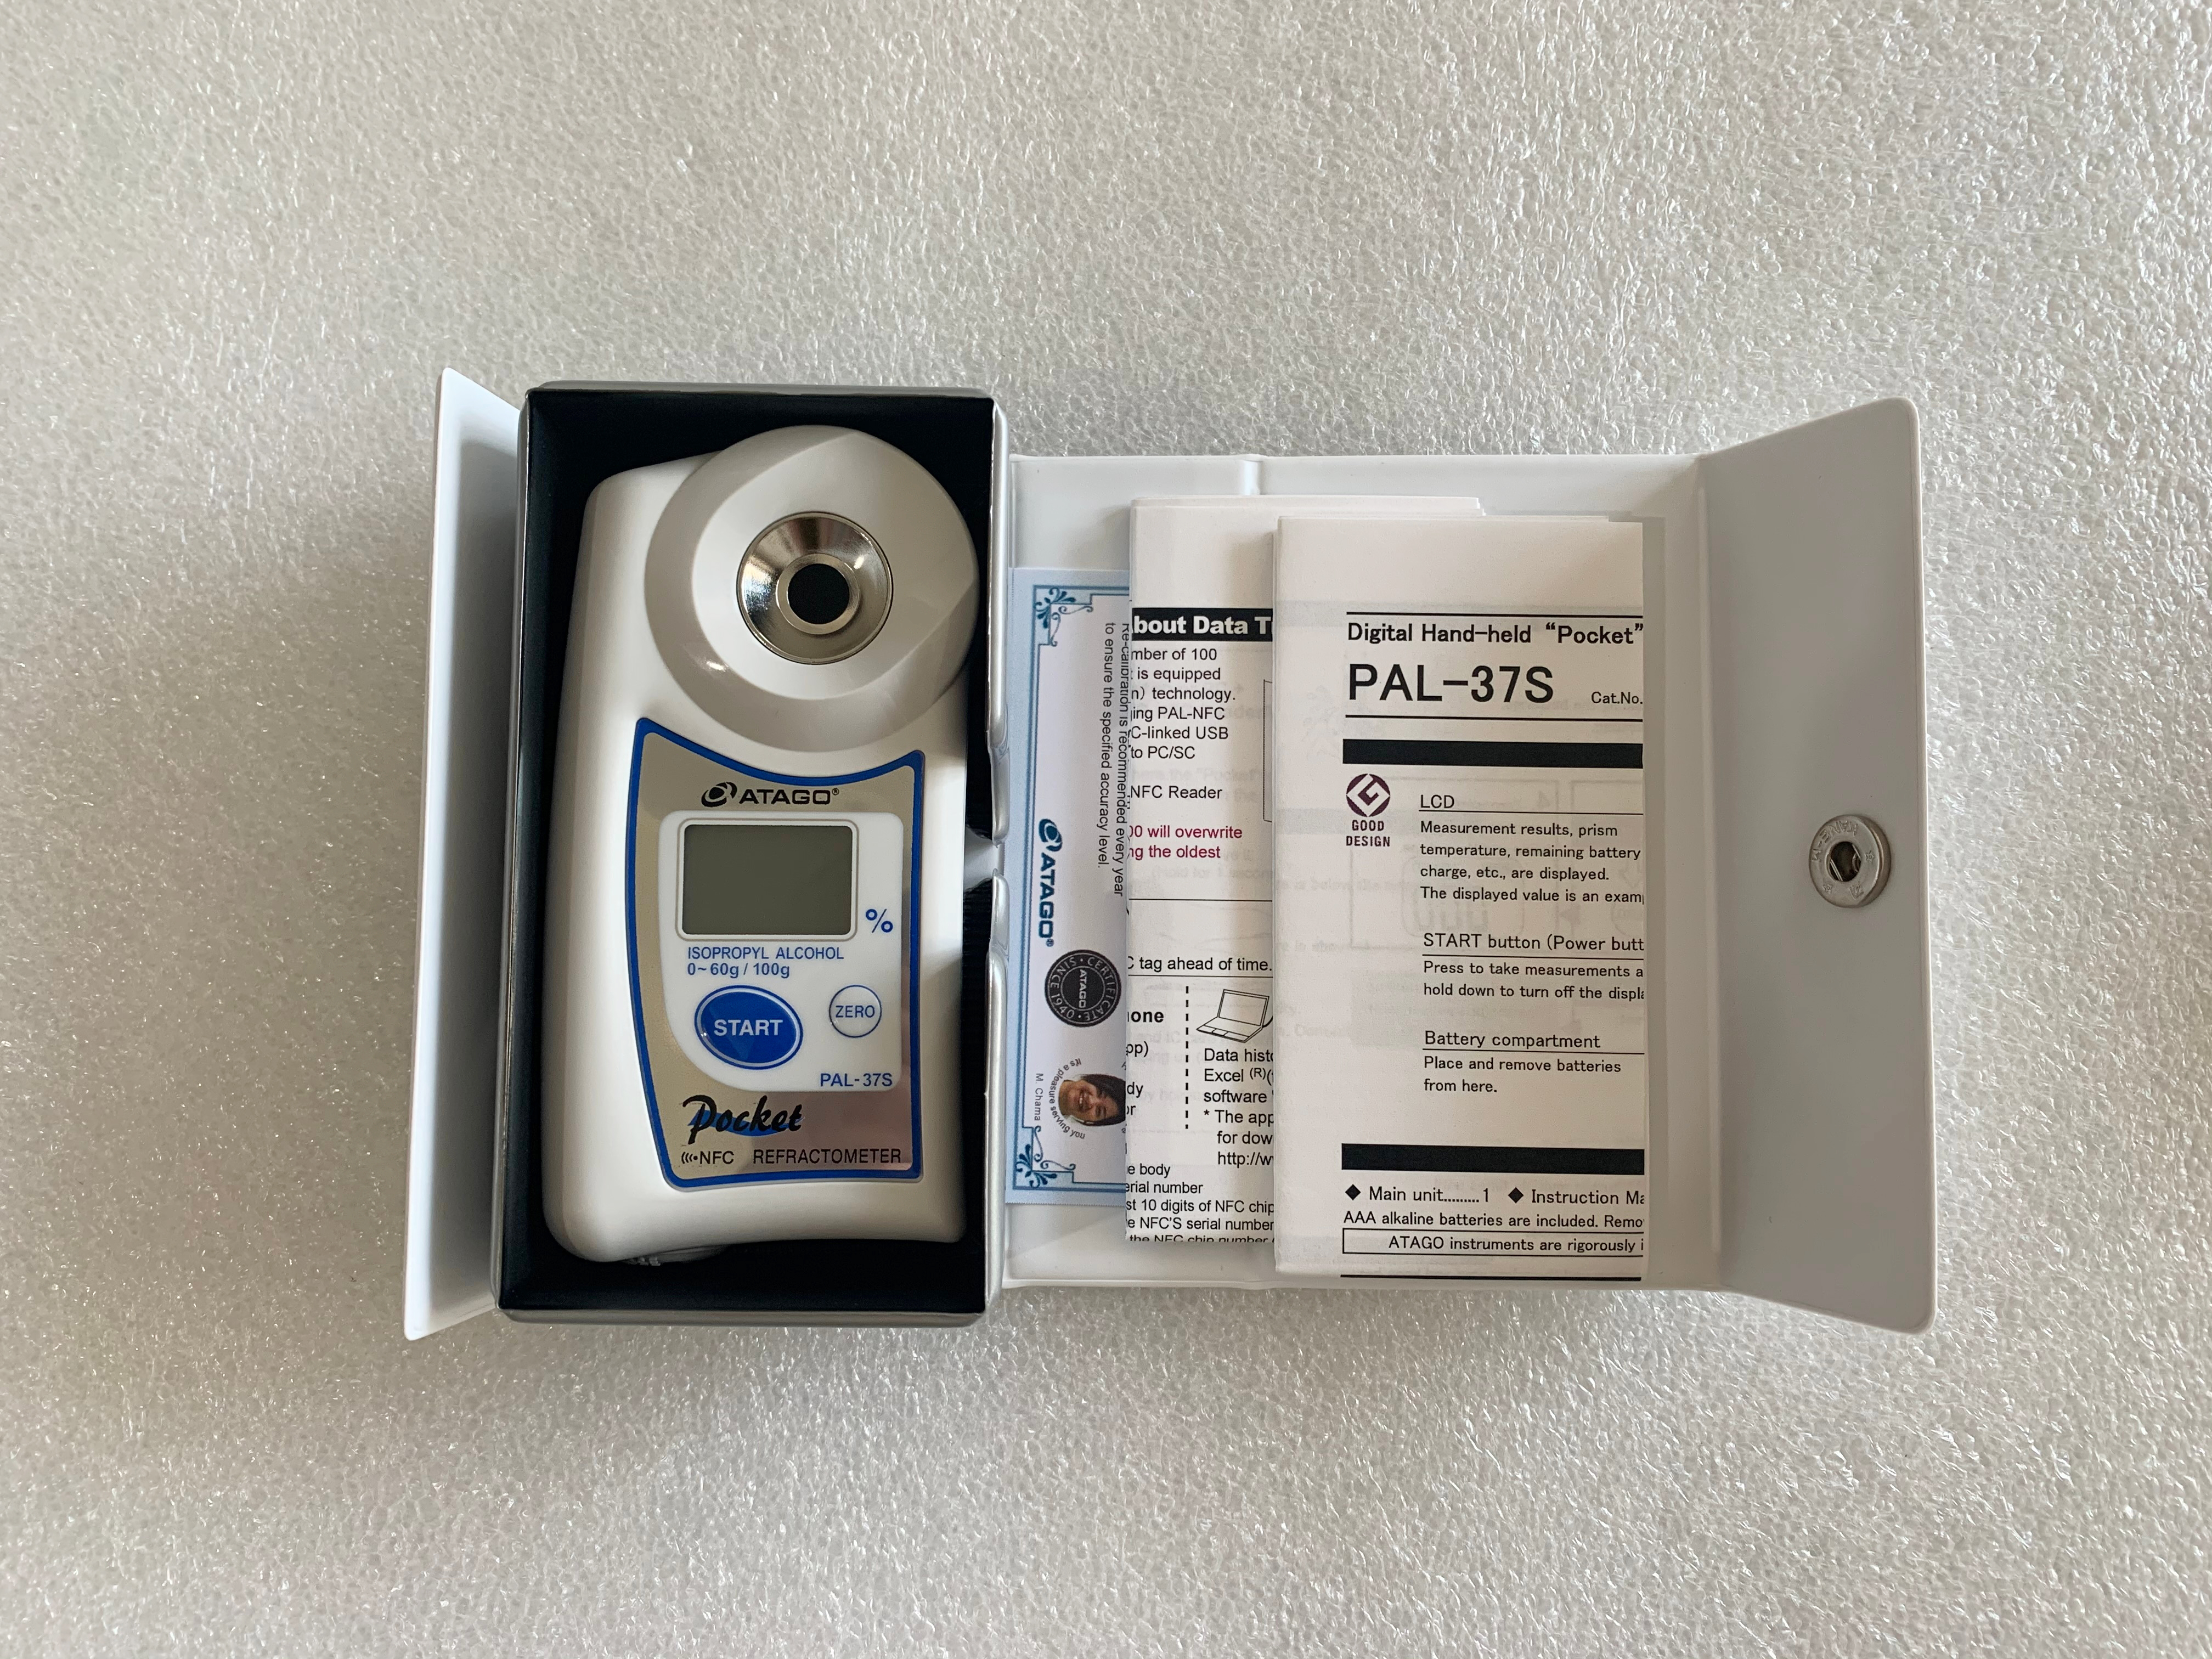 PAL-37S Isopropyl Alcohol Refractometer